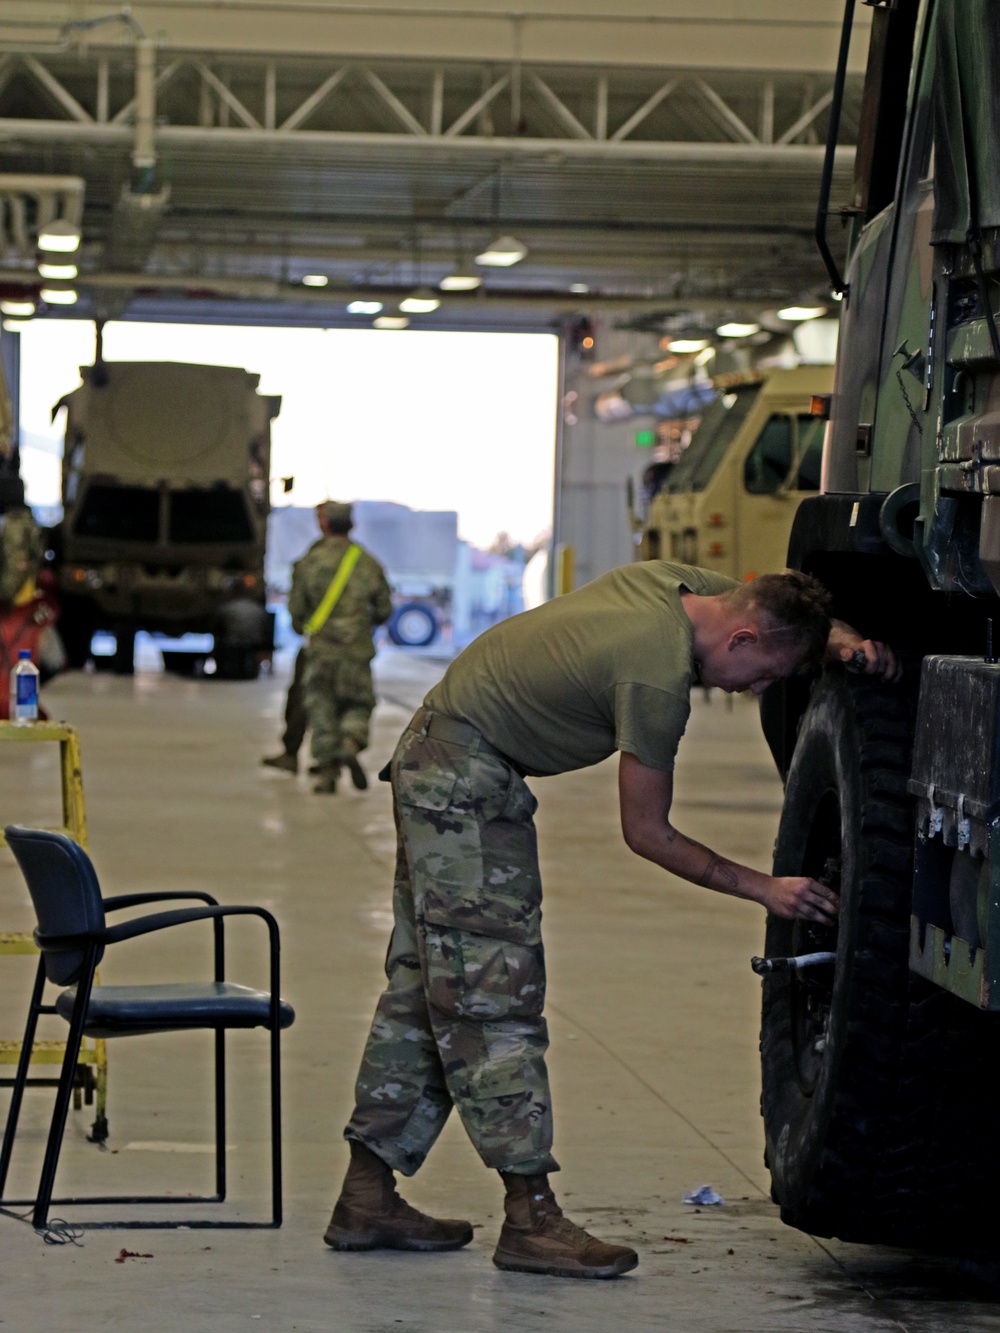 110th Composite Truck Company Prepares to Deploy in Support of Hurricane Relief